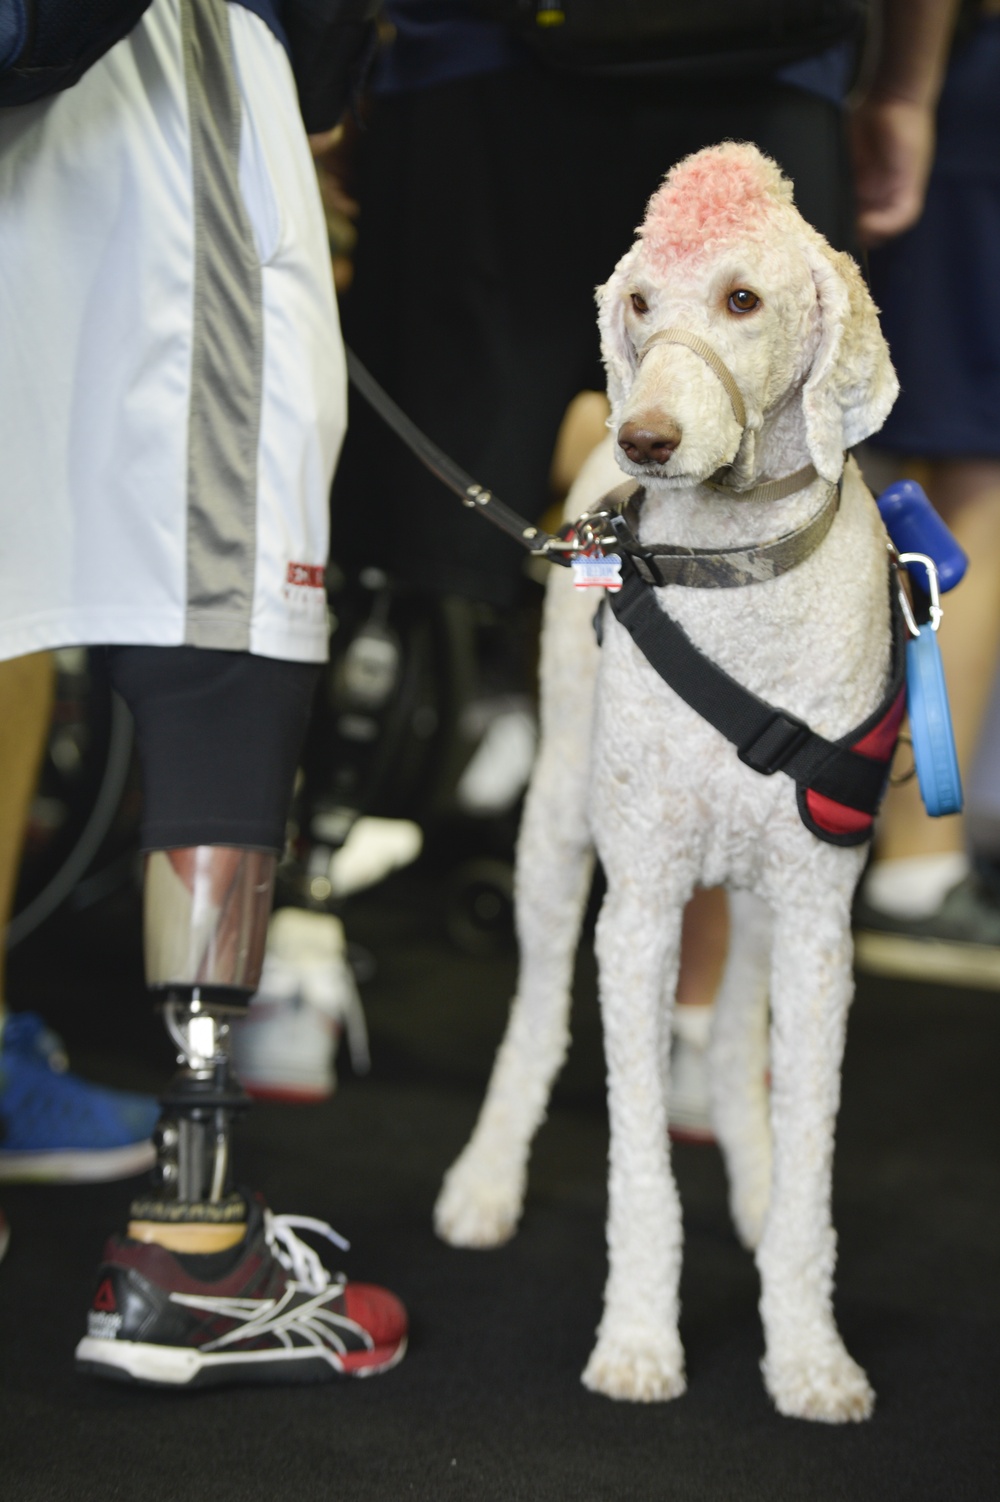 United States Navy Wounded Warrior standing with Service Dog